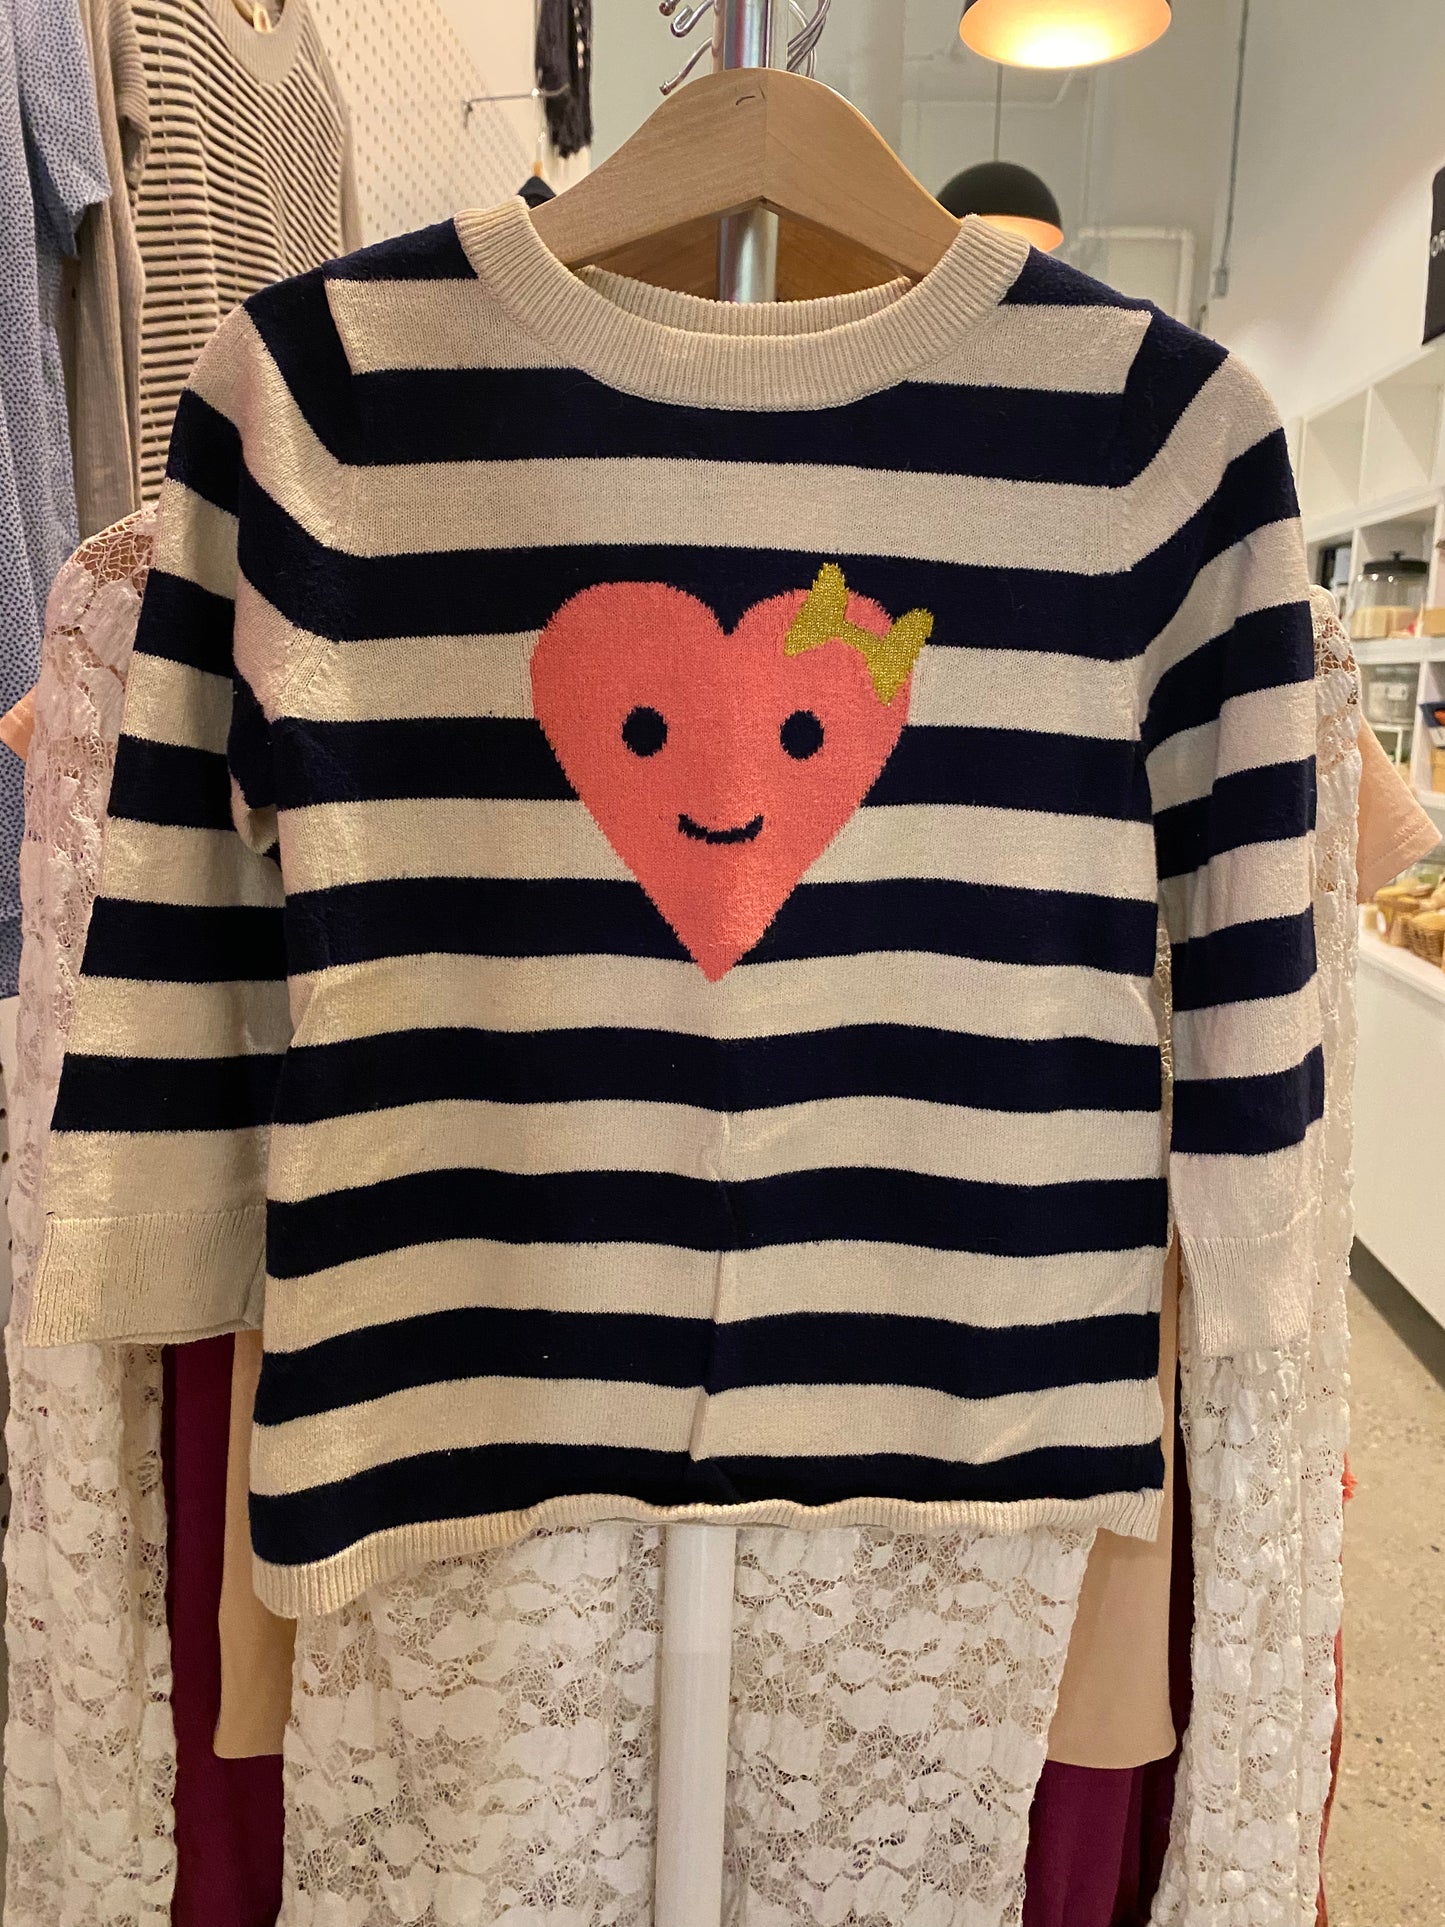 Consignment #7790-10 Baby Gap striped sweater with heart face sz 4